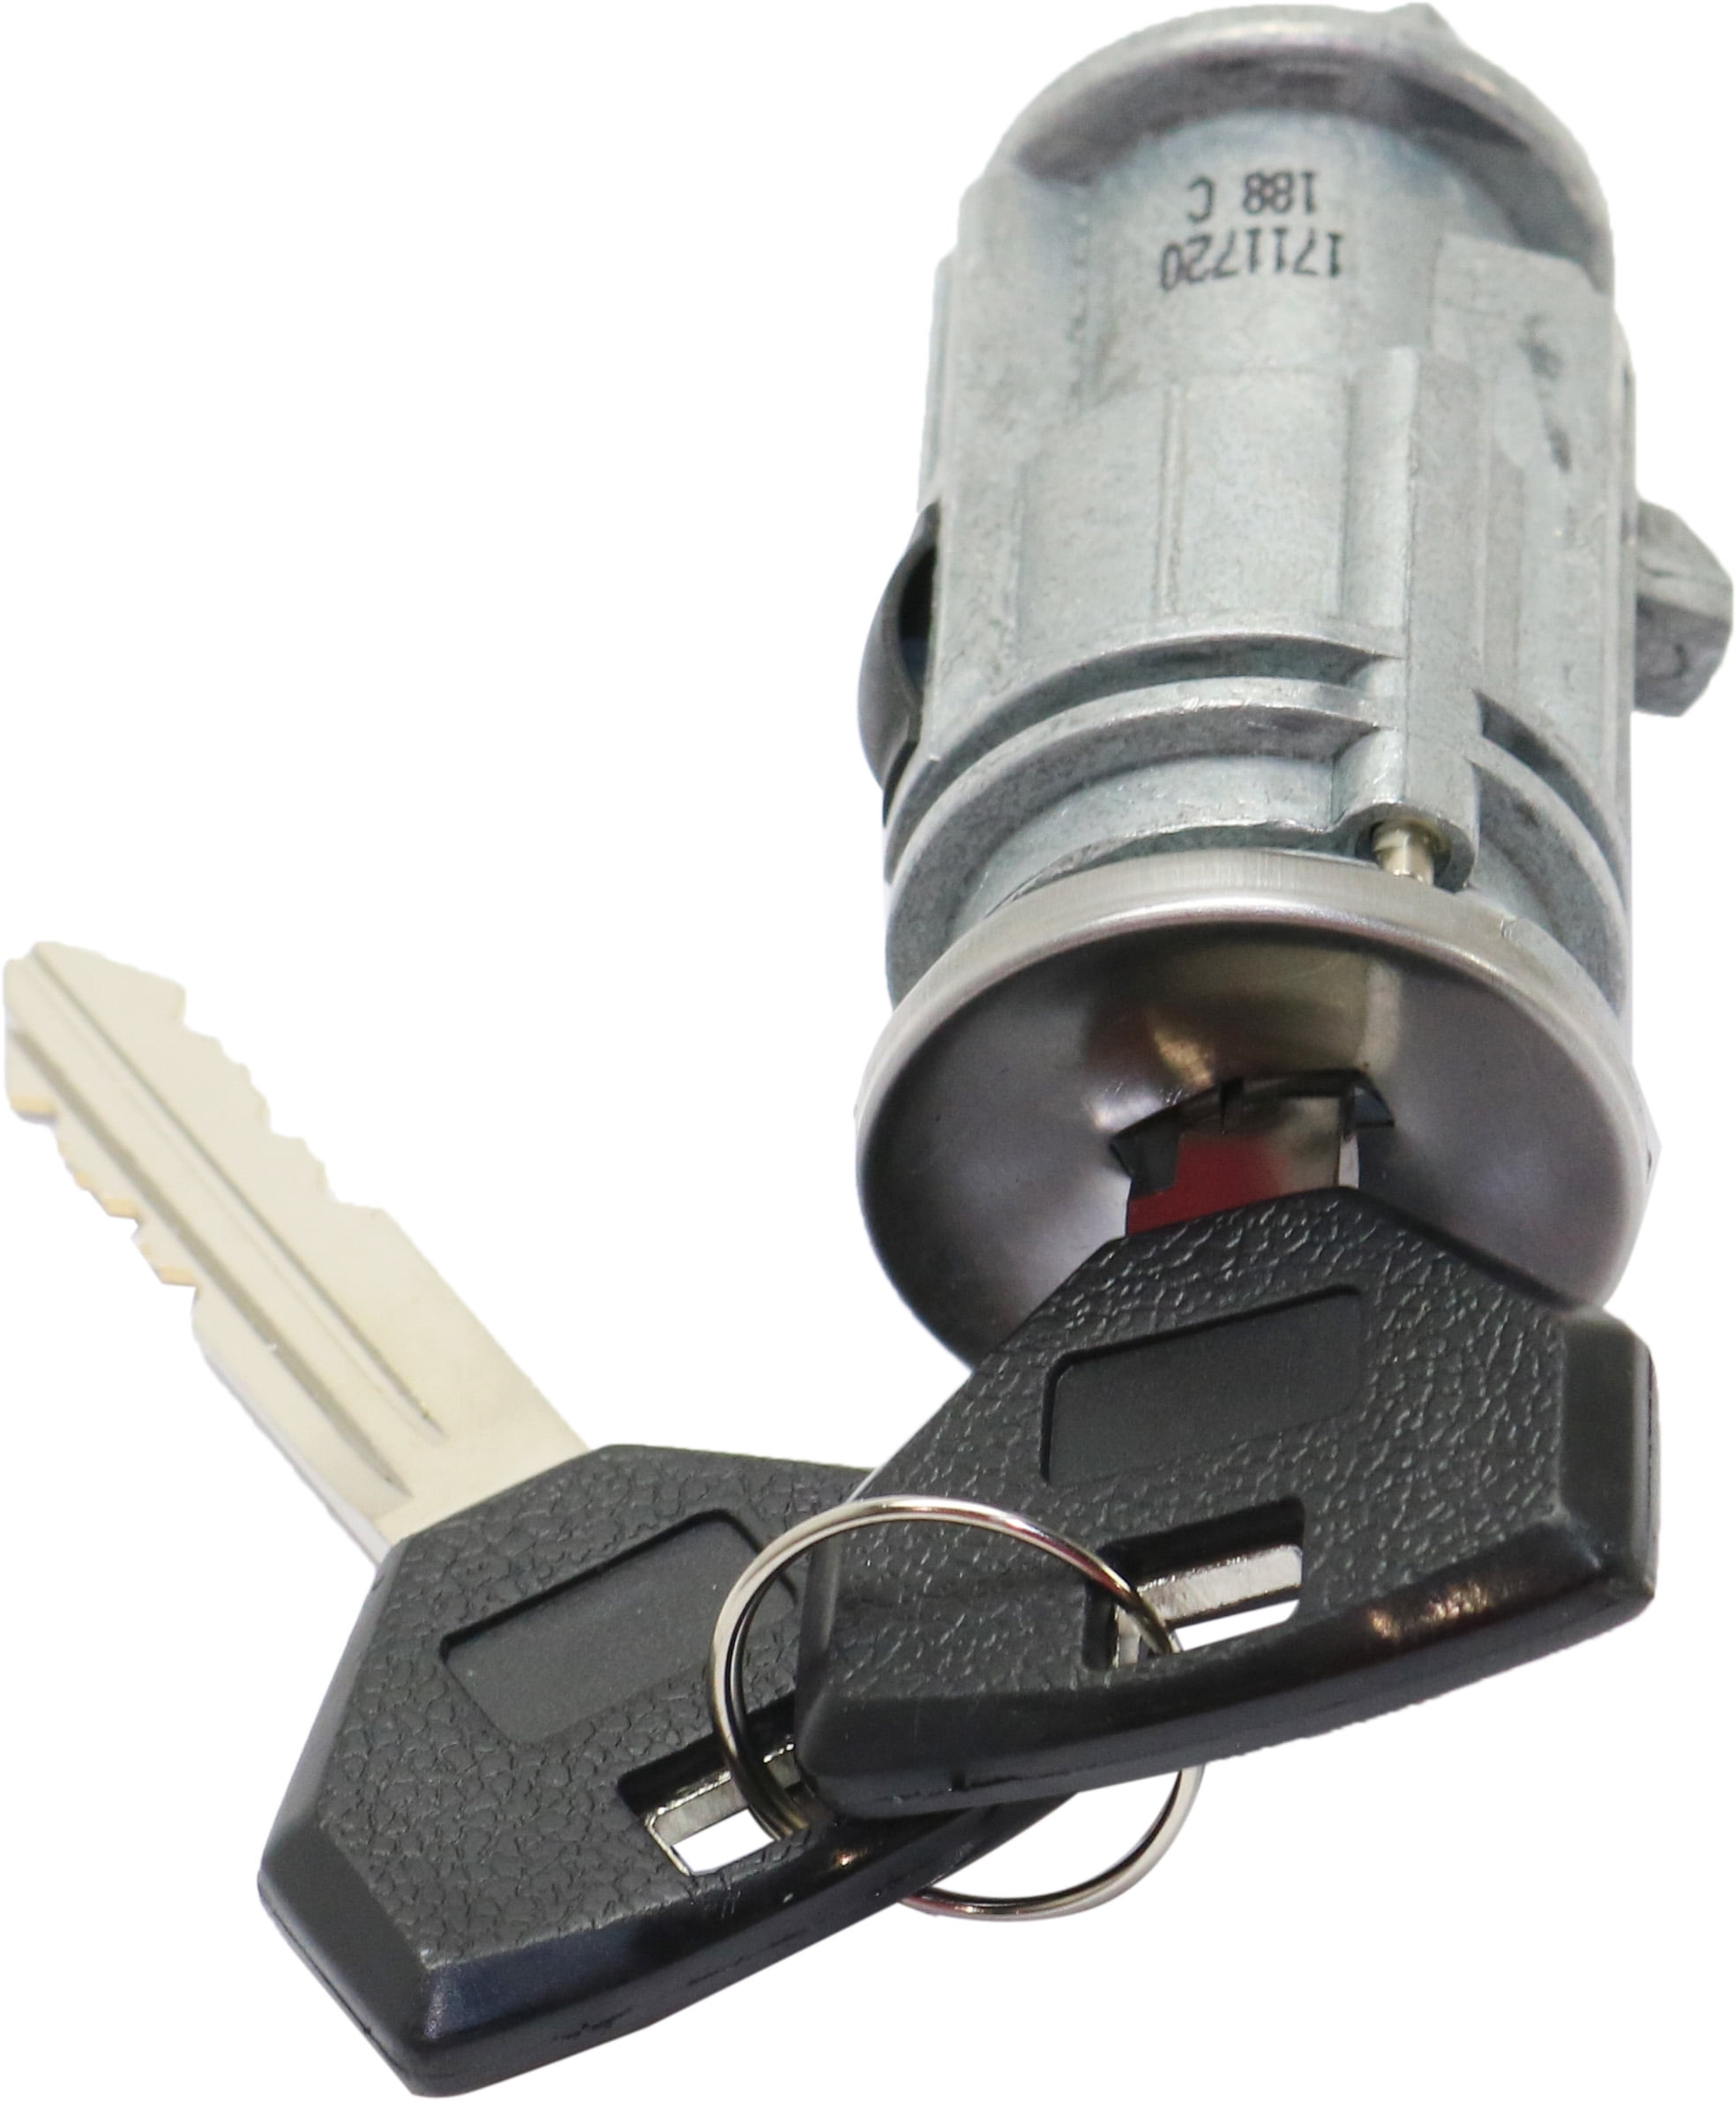 Ignition Lock Cylinder REPLACES Standard US-285L 